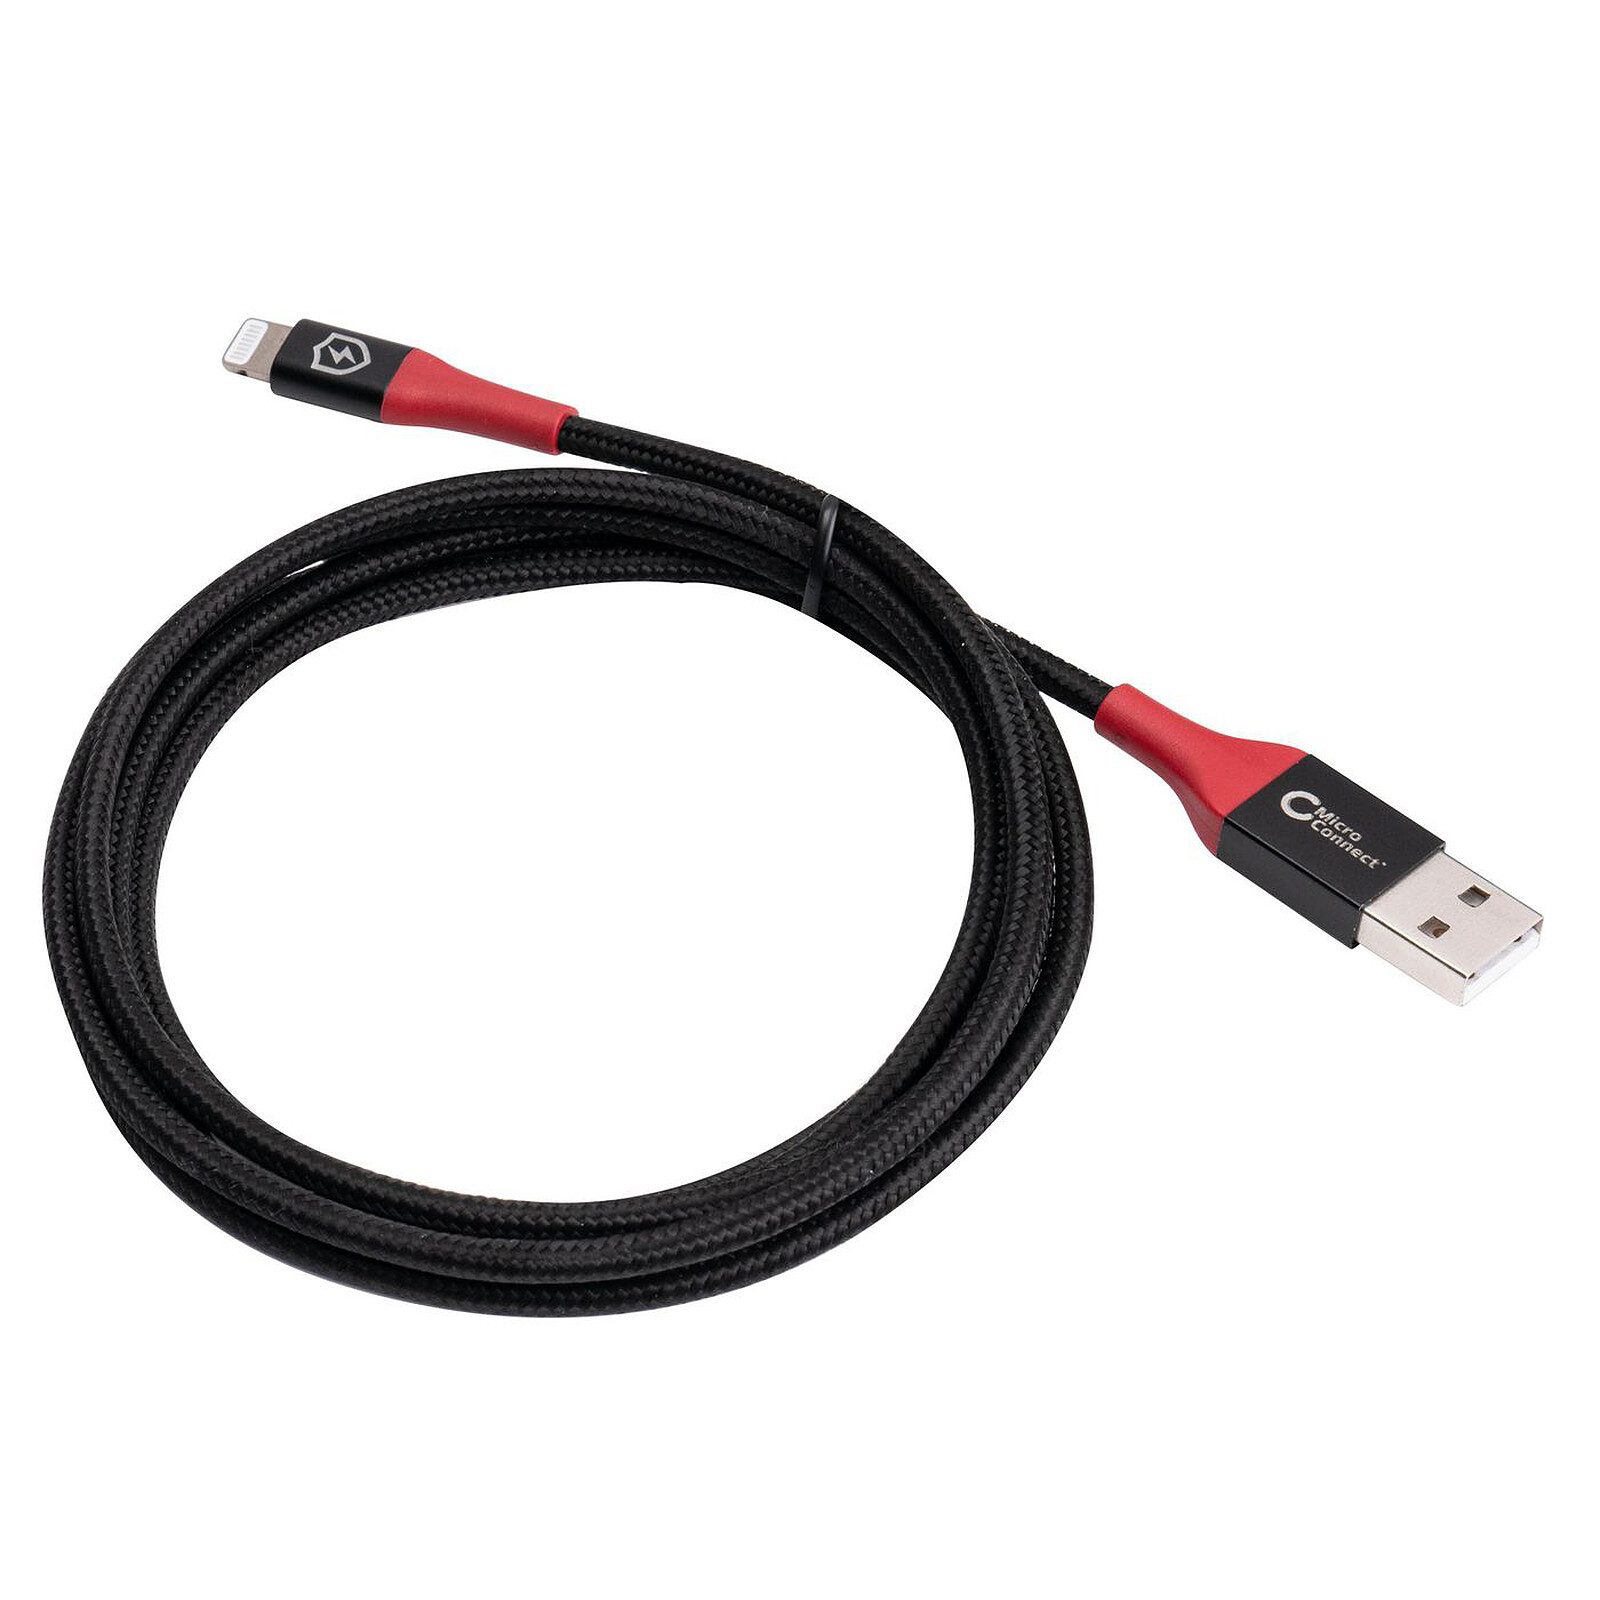 Real Cable B6932 - High quality cable - LDLC 3-year warranty